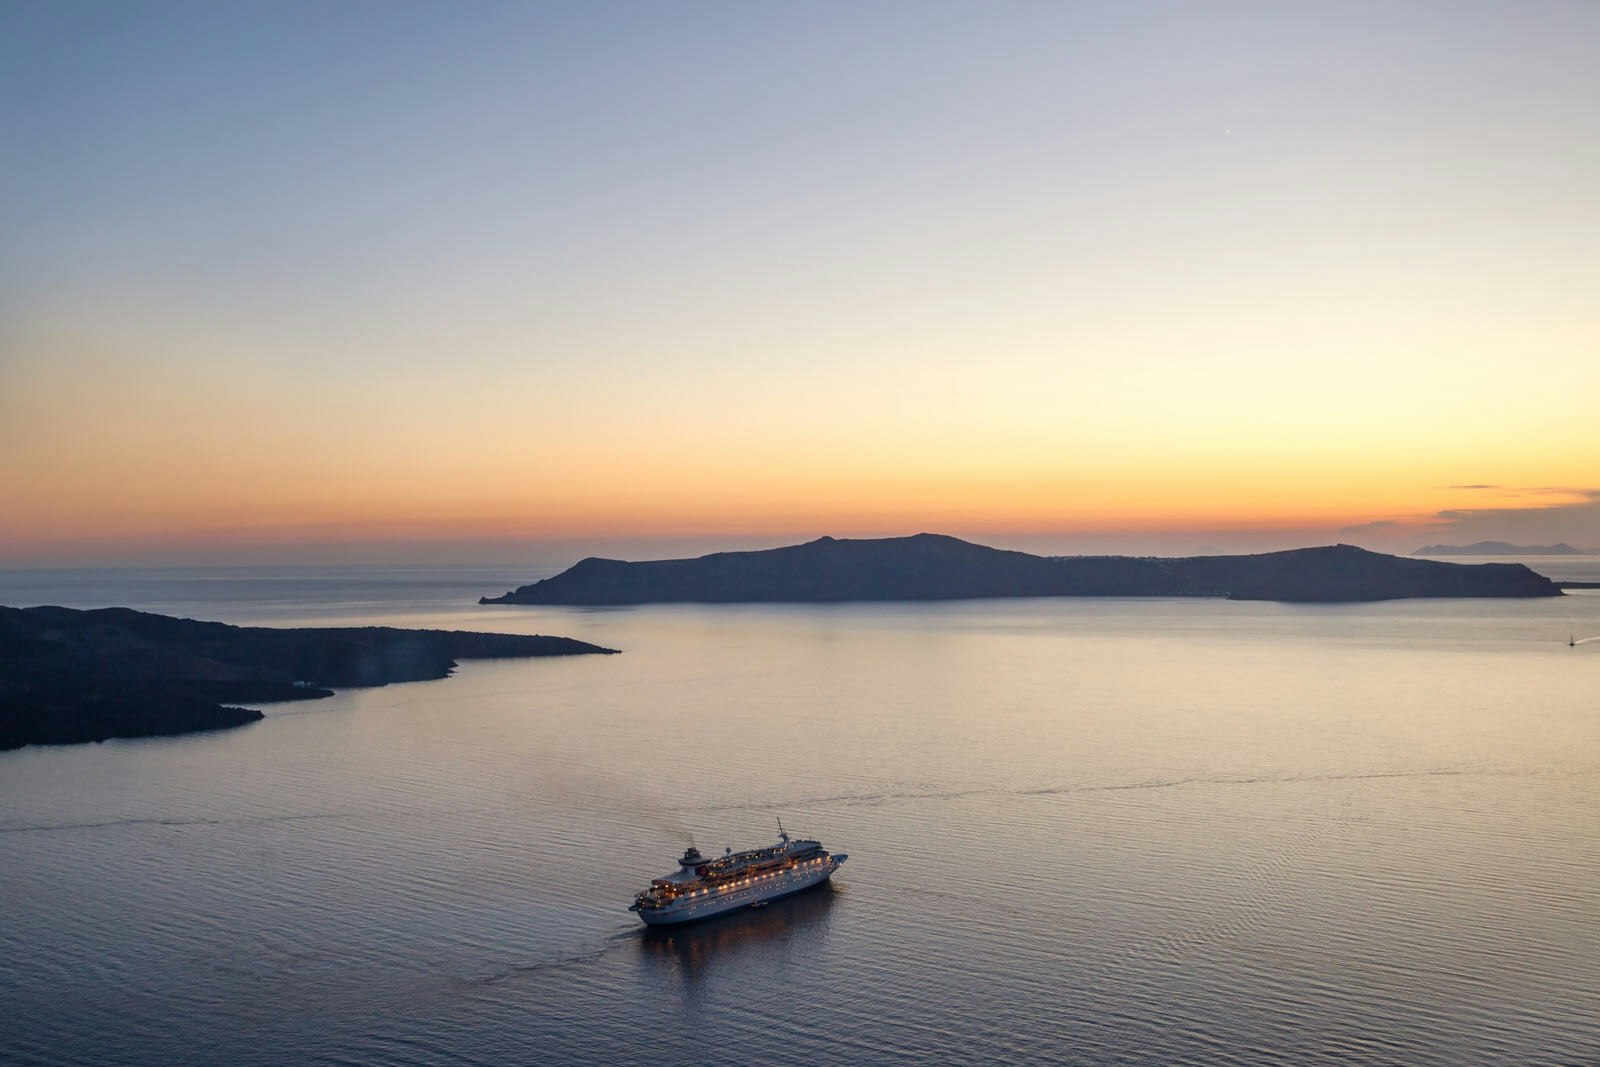 The Mediterranean is just the start of this epic cruise © Matteo Colombo